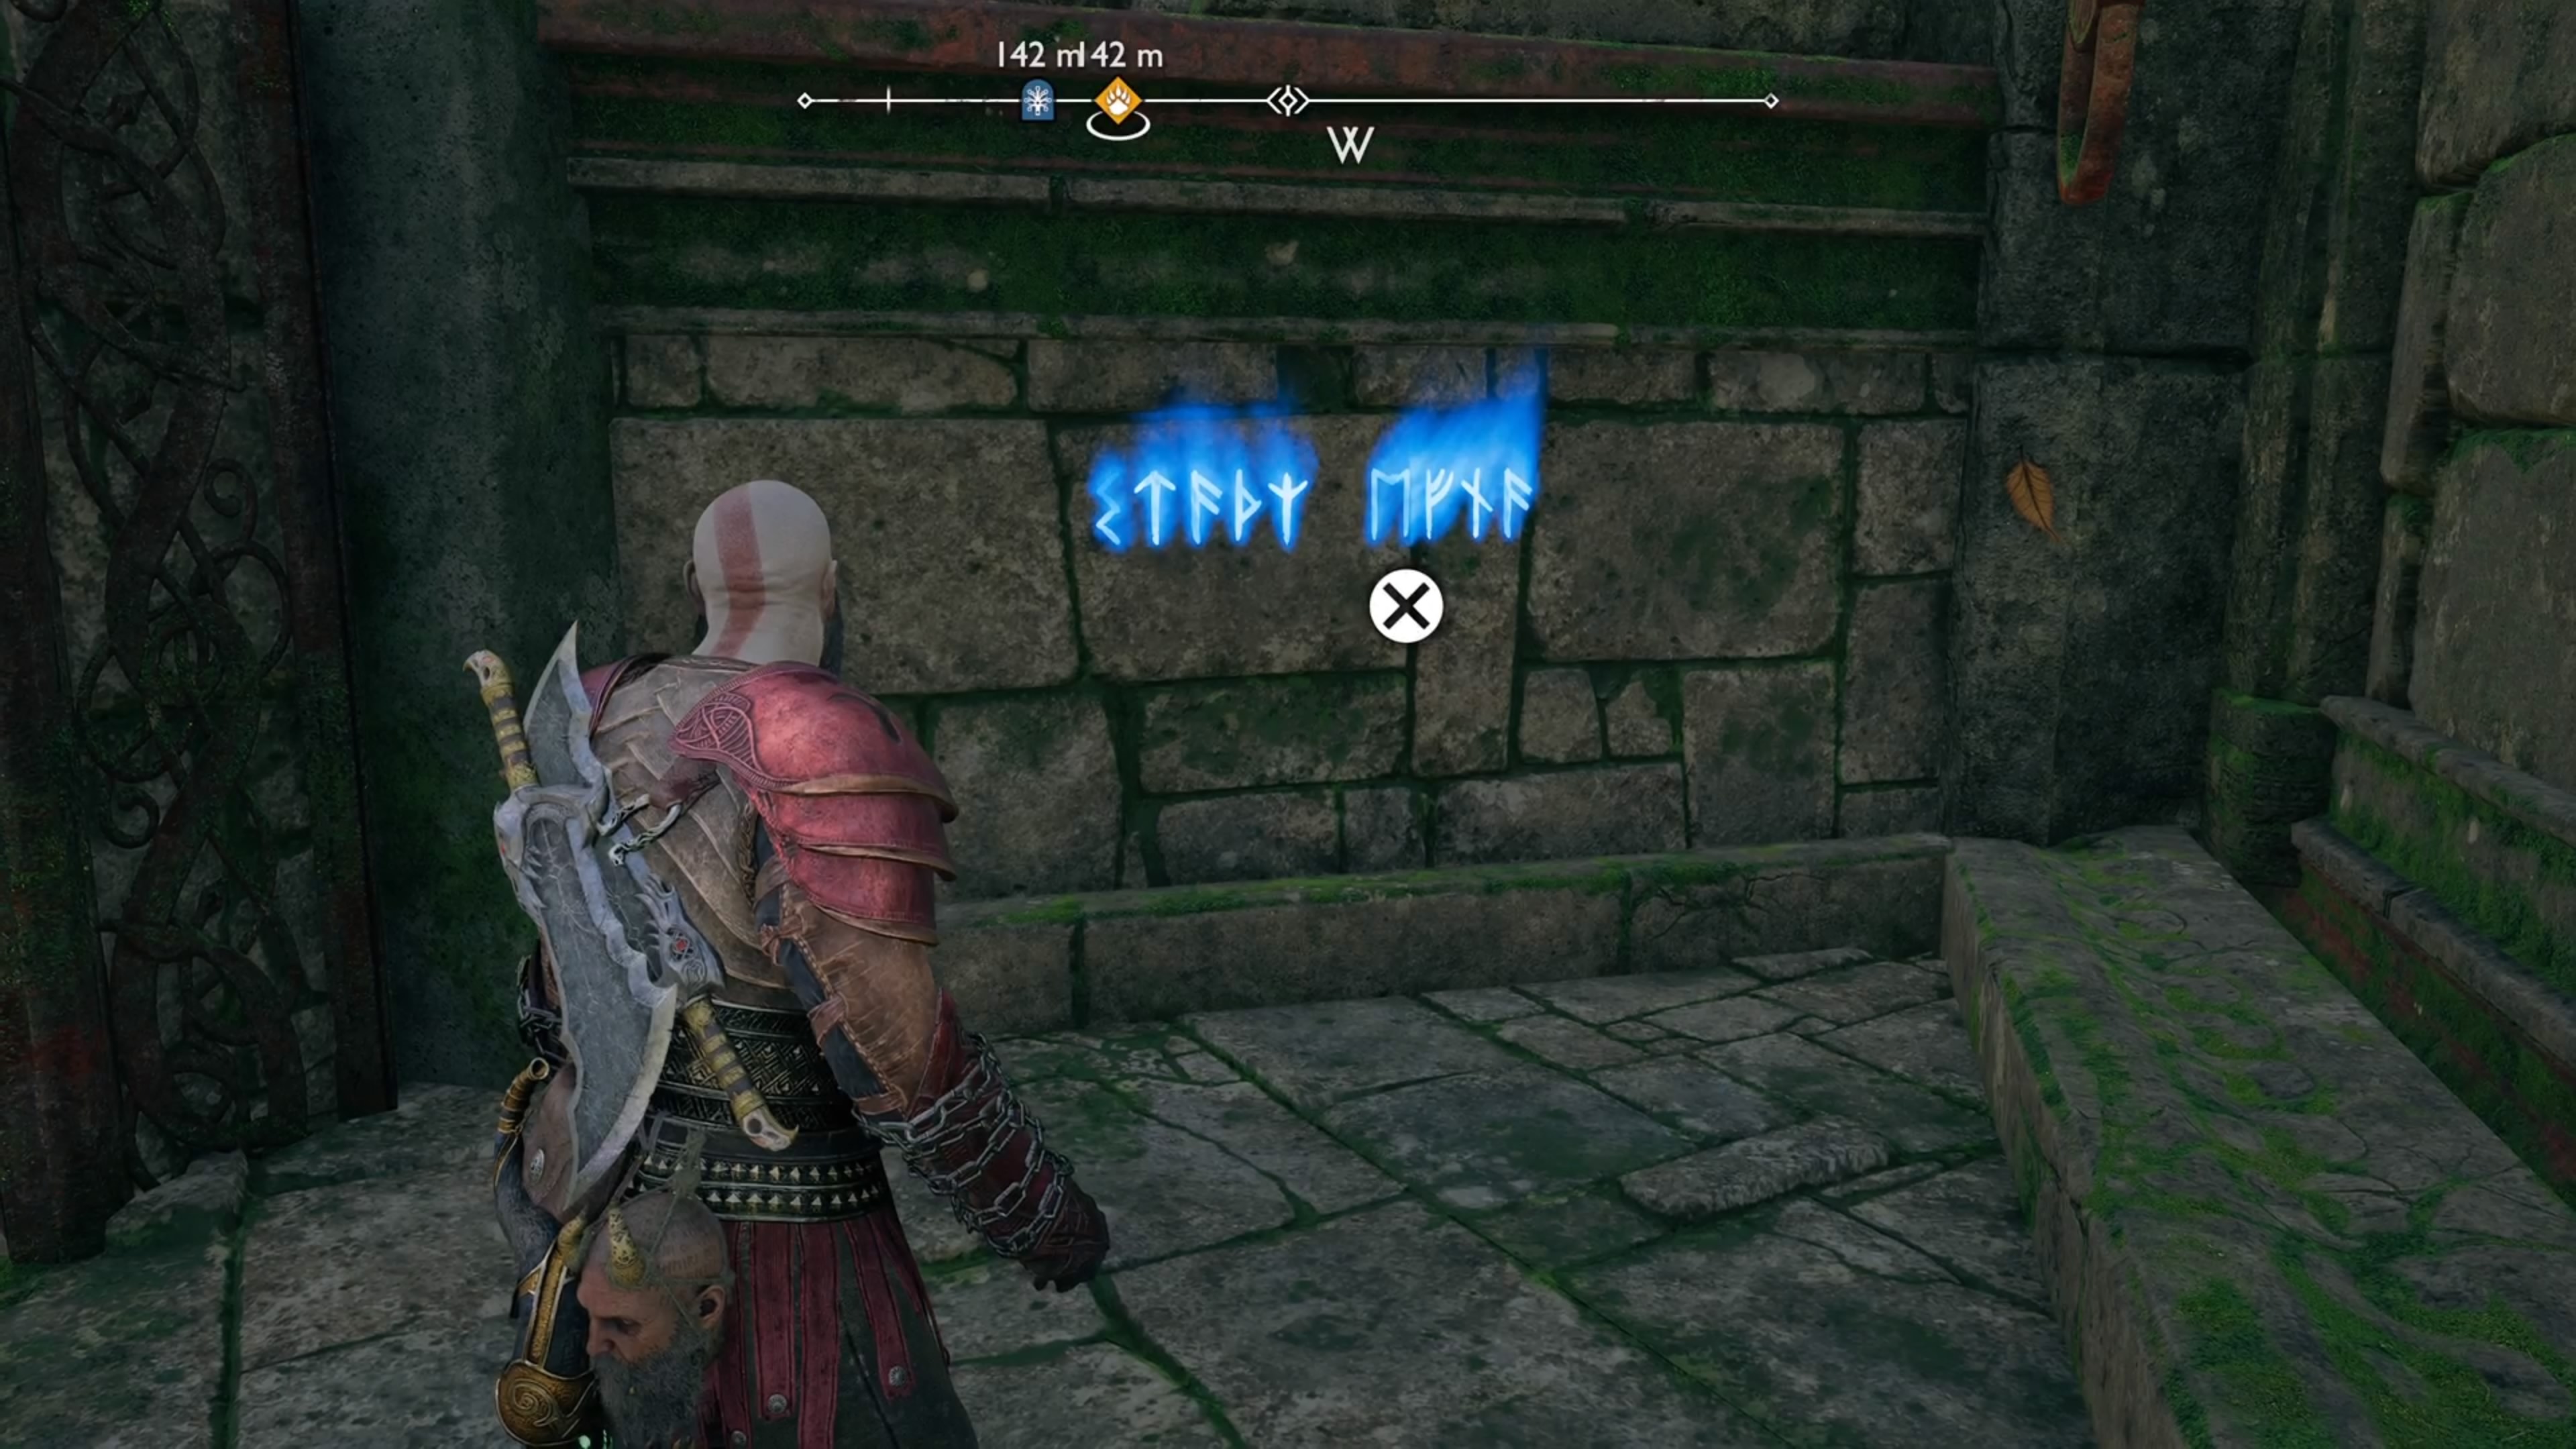 You will find the Rune Read on the wall after escaping the cage that’s part of Path of Destruction